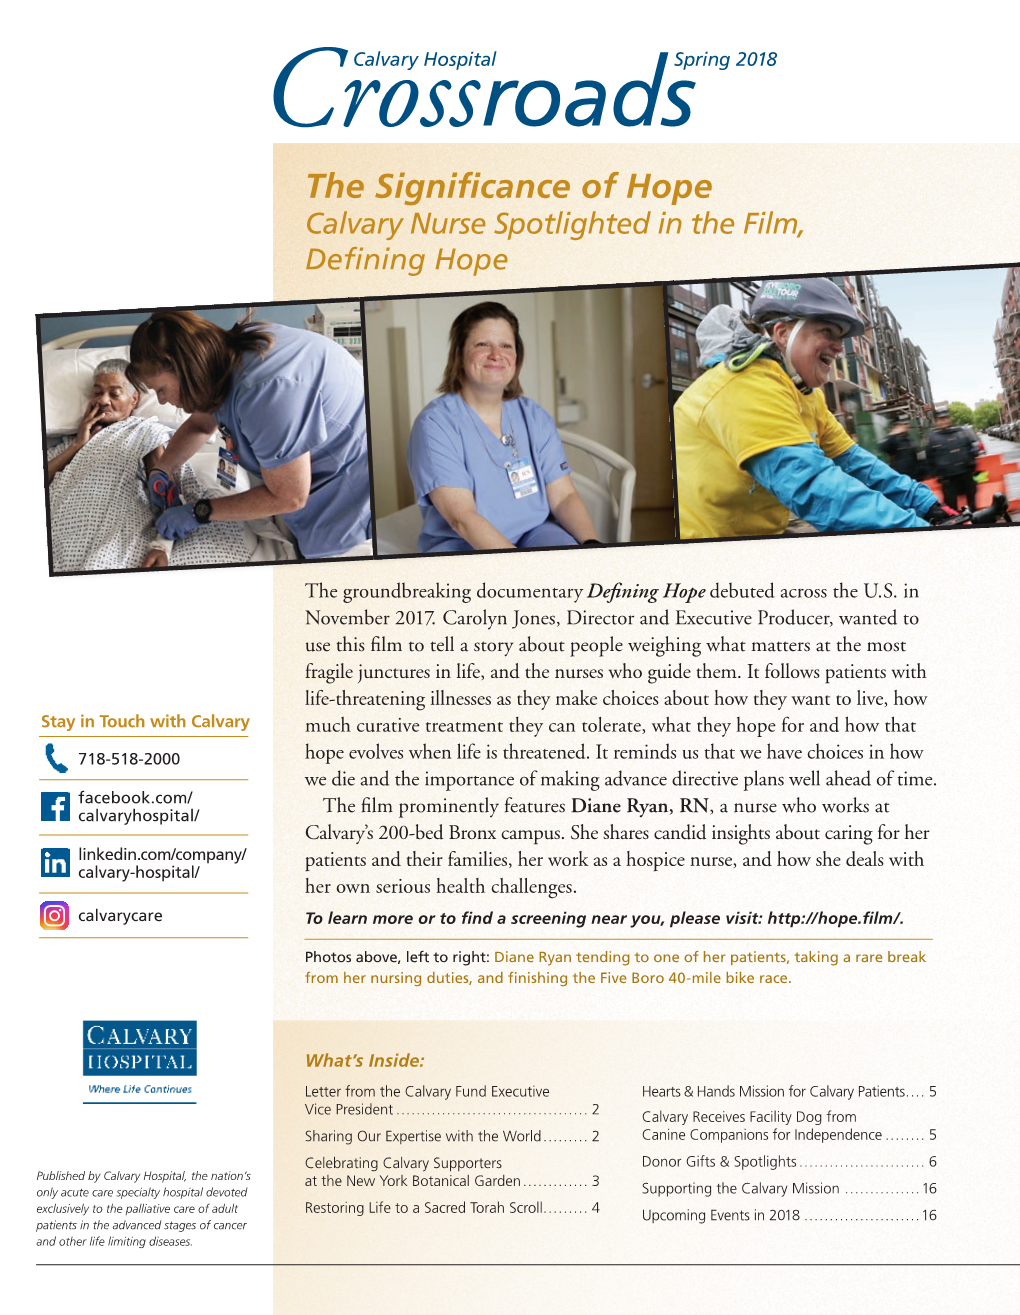 The Significance of Hope Calvary Nurse Spotlighted in the Film, Defining Hope